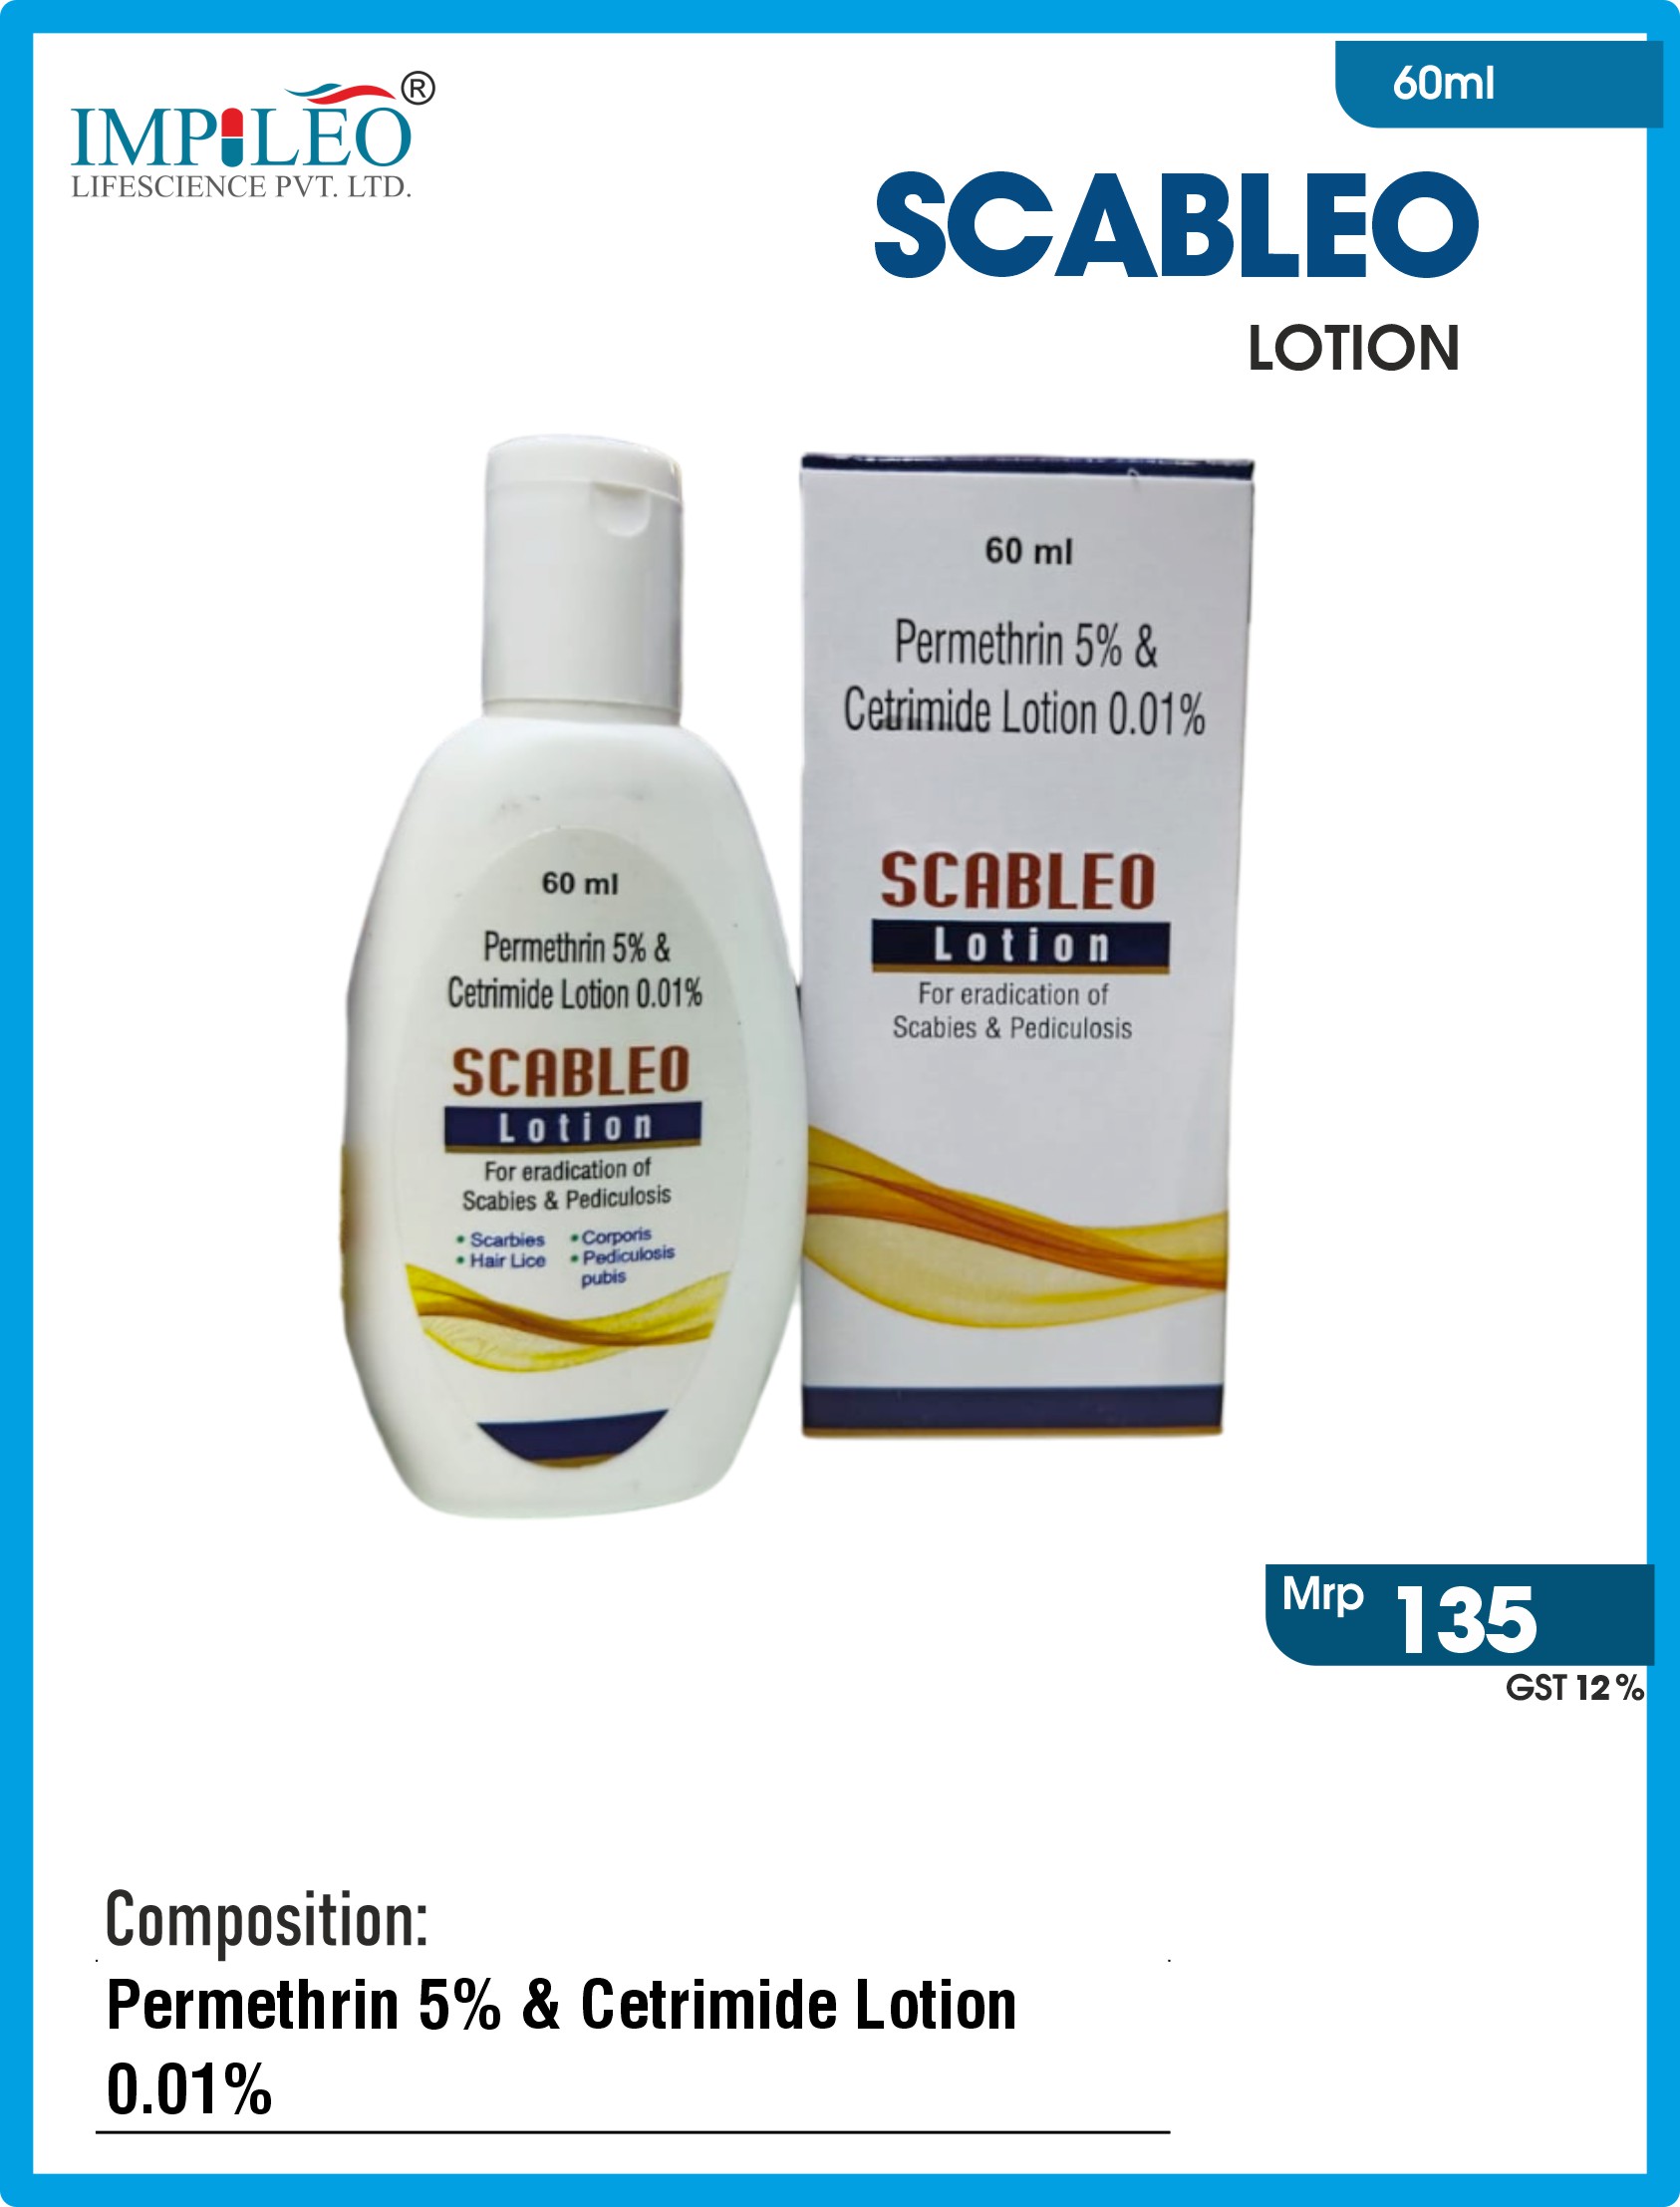 Top PCD Pharma Franchise in Chandigarh Provides SCABLEO LOTION for Skin Health